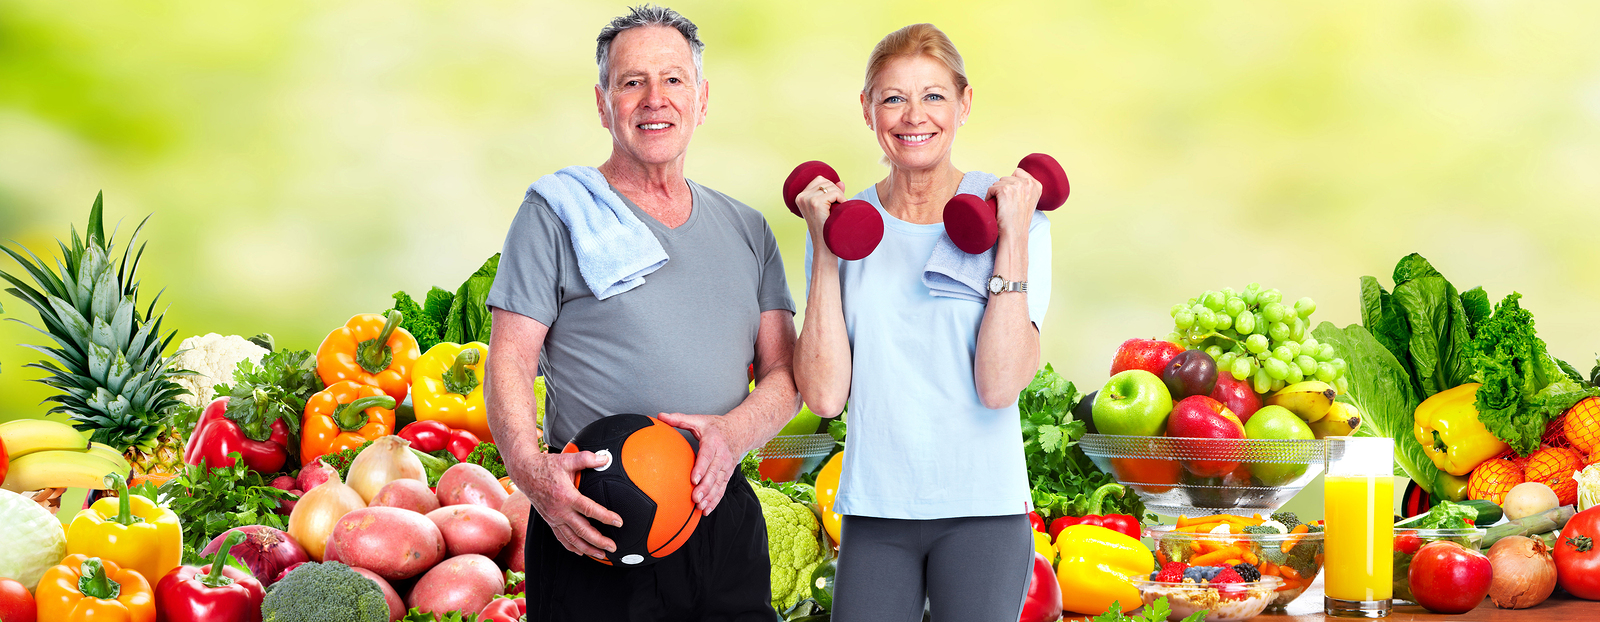 Healthy senior couple over fresh fruits and vegetables background.